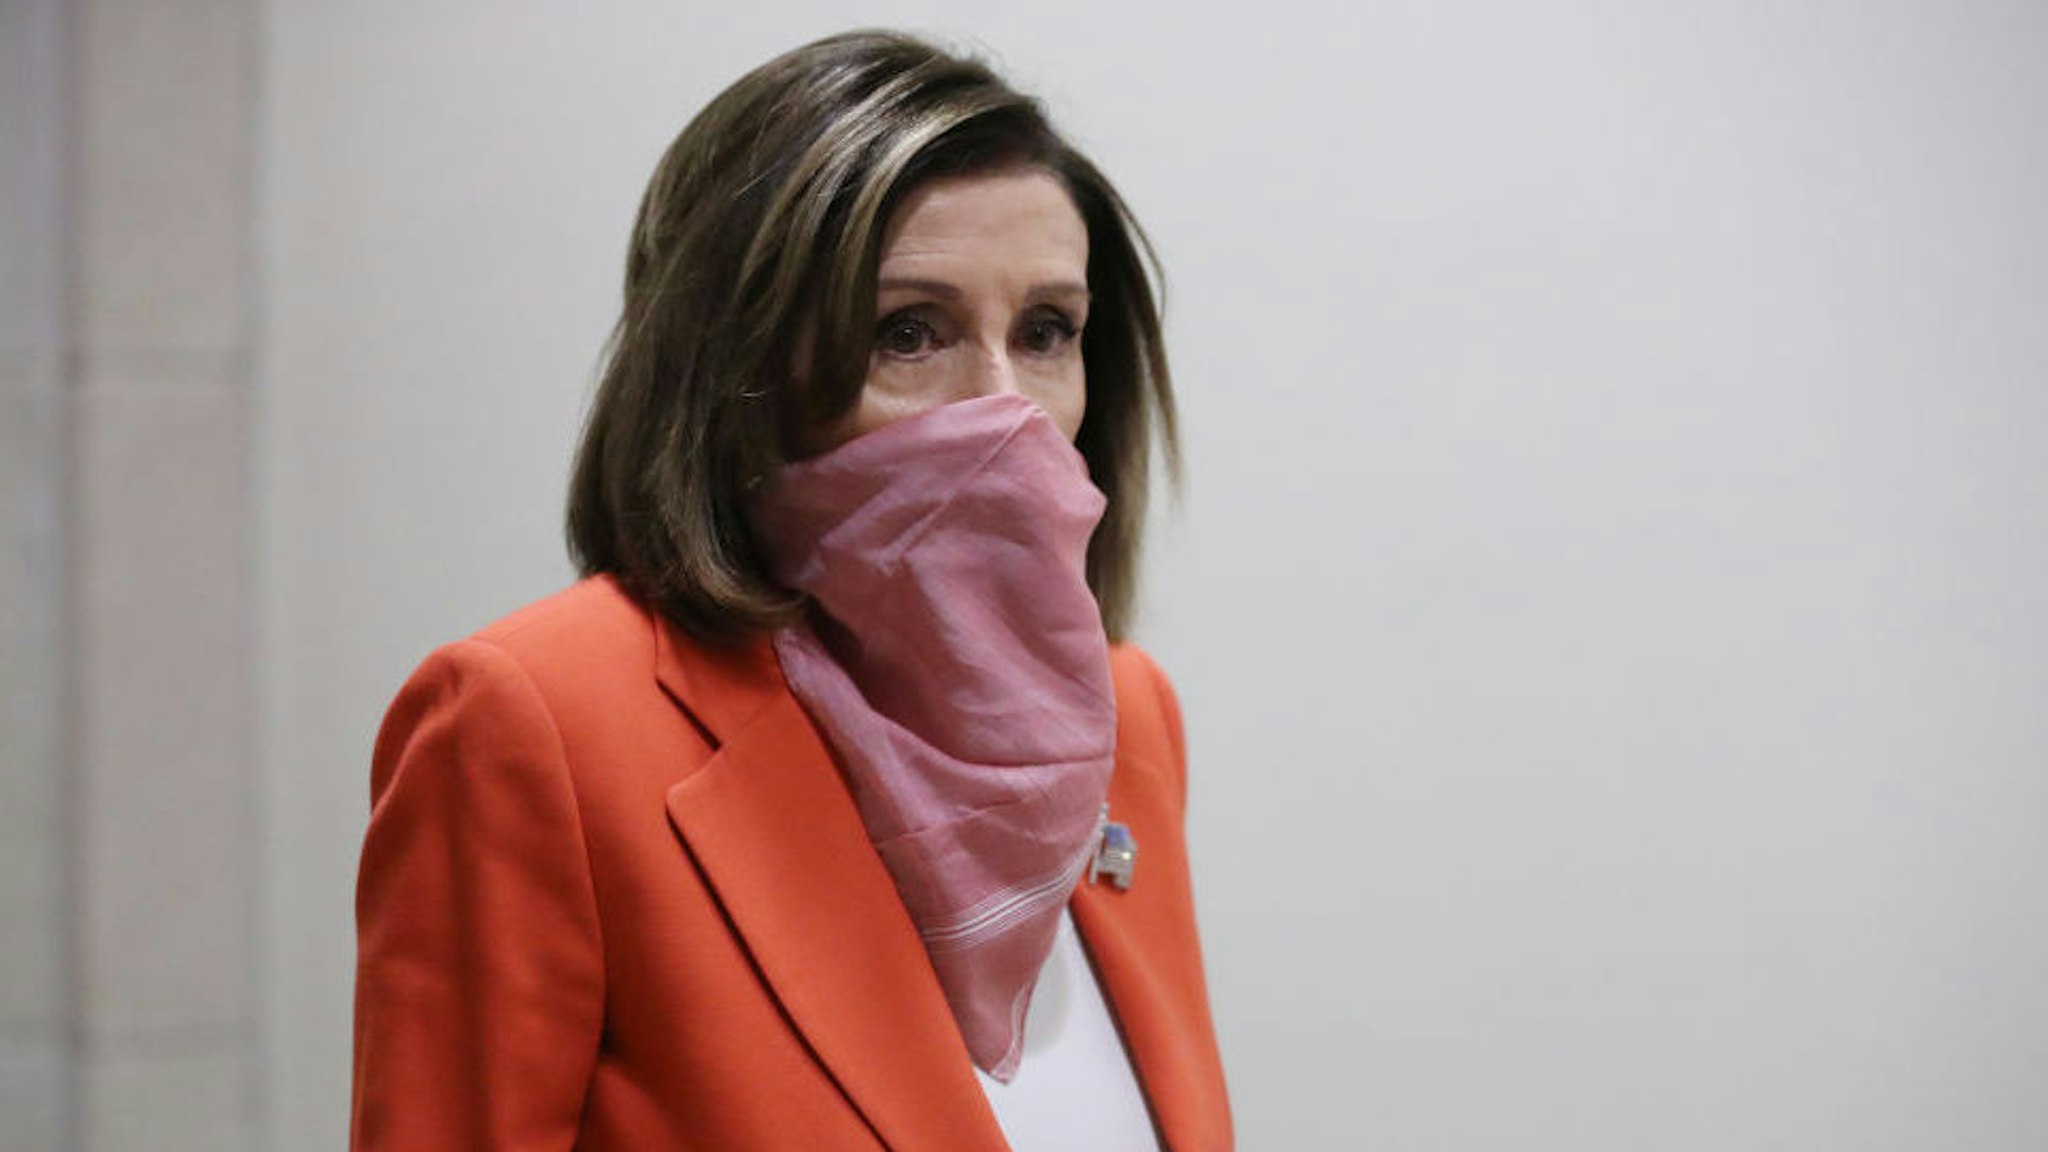 Speaker of the House Nancy Pelosi (D-CA) wears a scarf over her mouth and nose as she arrives for her weekly news conference during the novel coronavirus pandemic at the U.S. Capitol April 24, 2020 in Washington, DC. President Donald Trump is expected to sign a bipartisan $484 billion coronavirus relief package to restart a depleted small business loan program and to provide funds for hospitals and COVID-19 testing. (Photo by Chip Somodevilla/Getty Images)